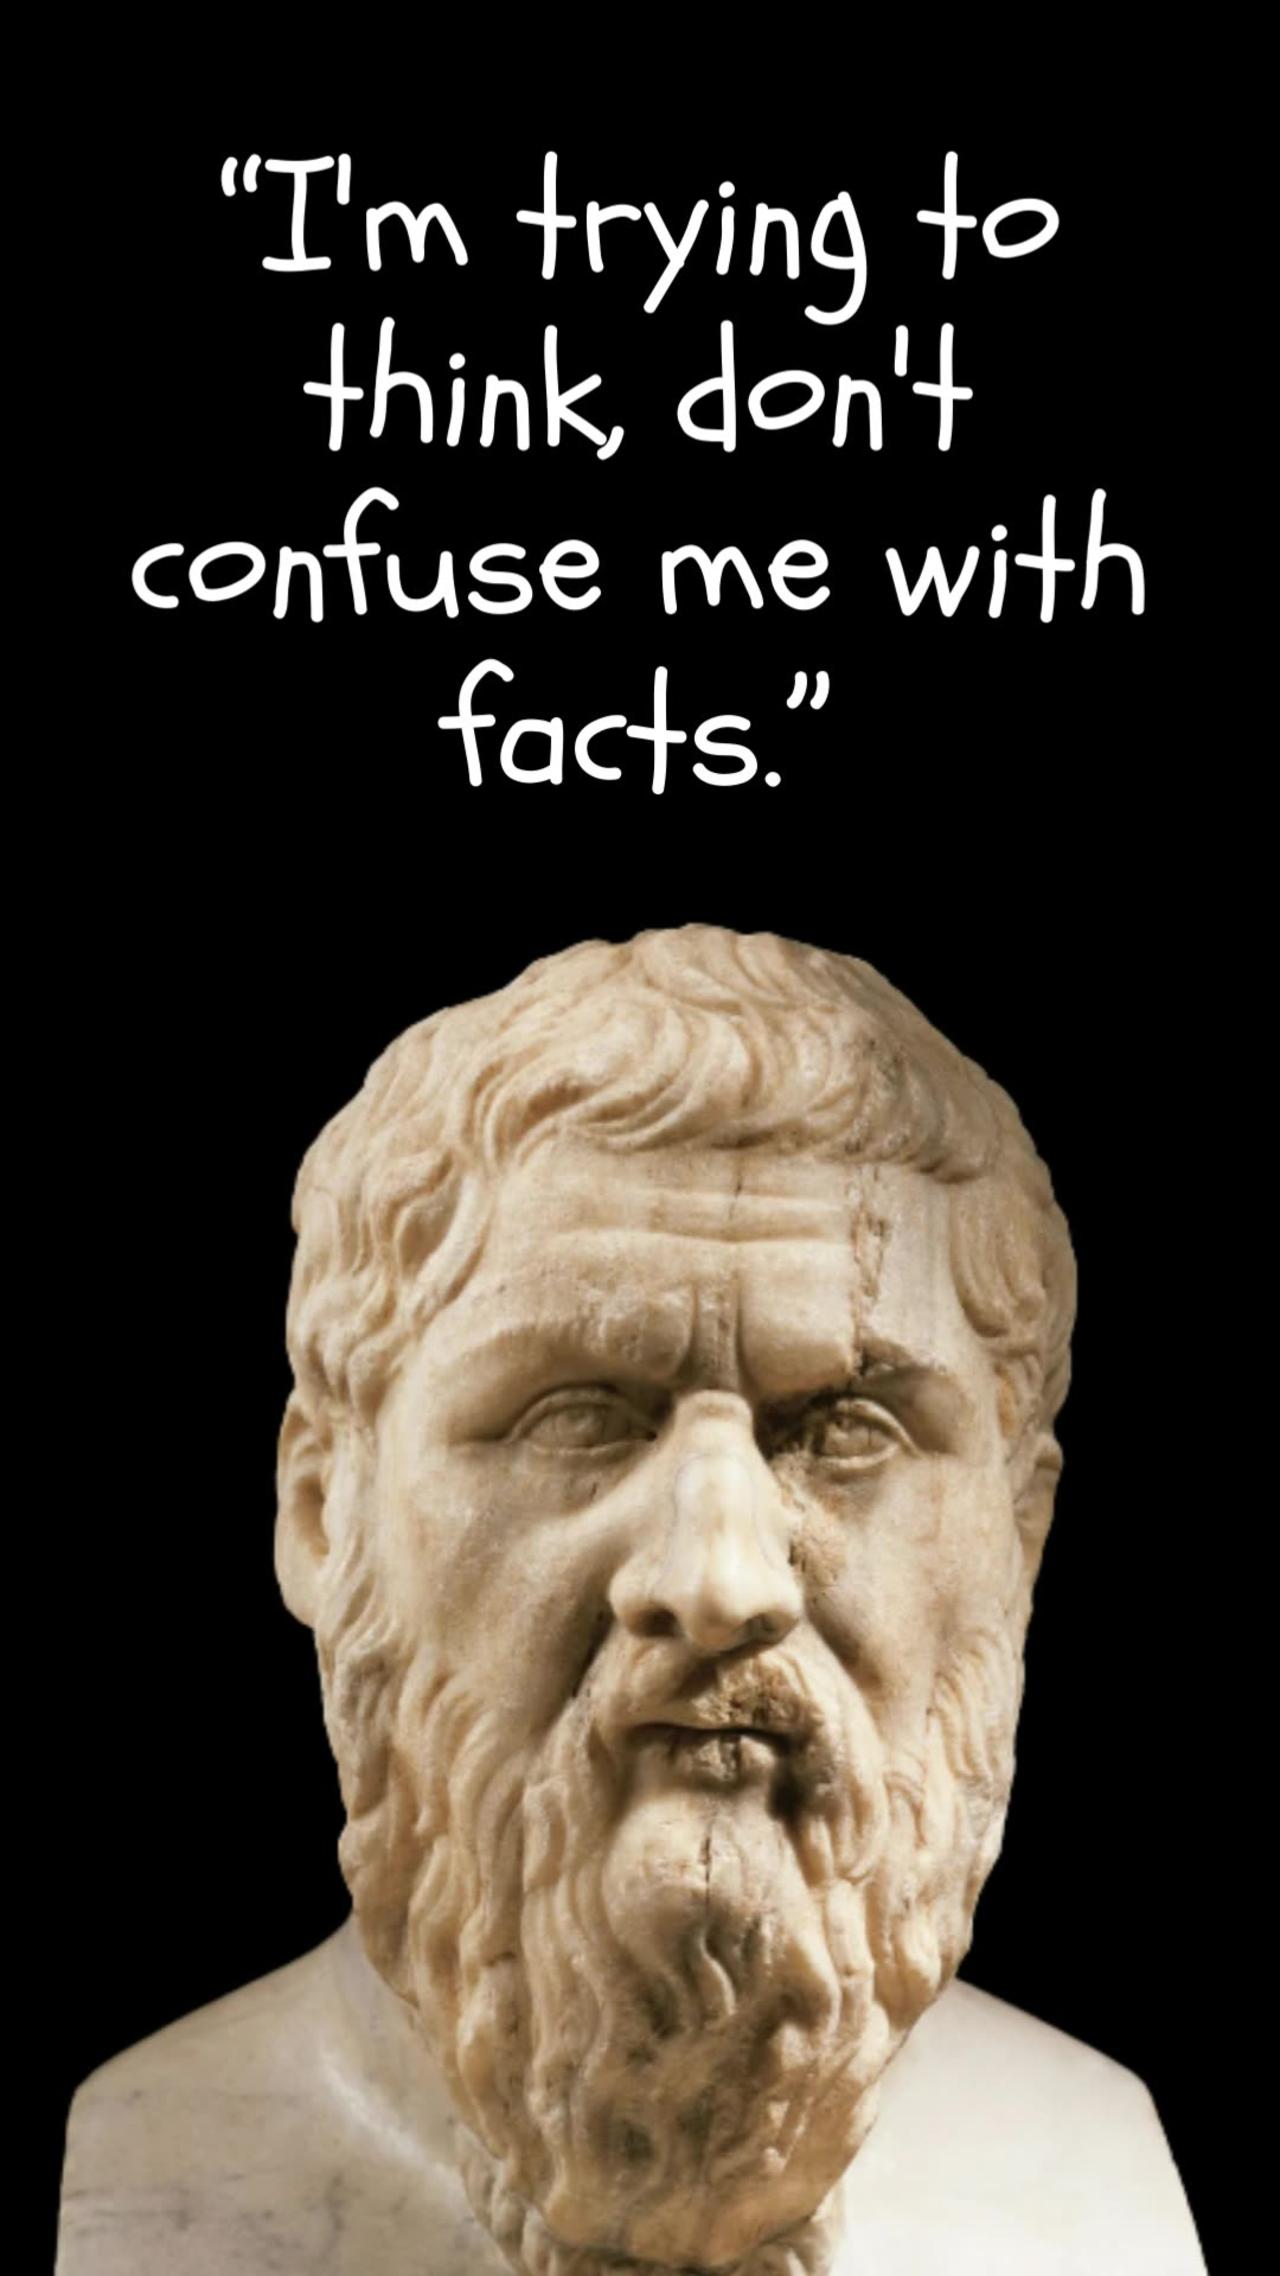 A Plato Quotes Success Story You'll Never Believe